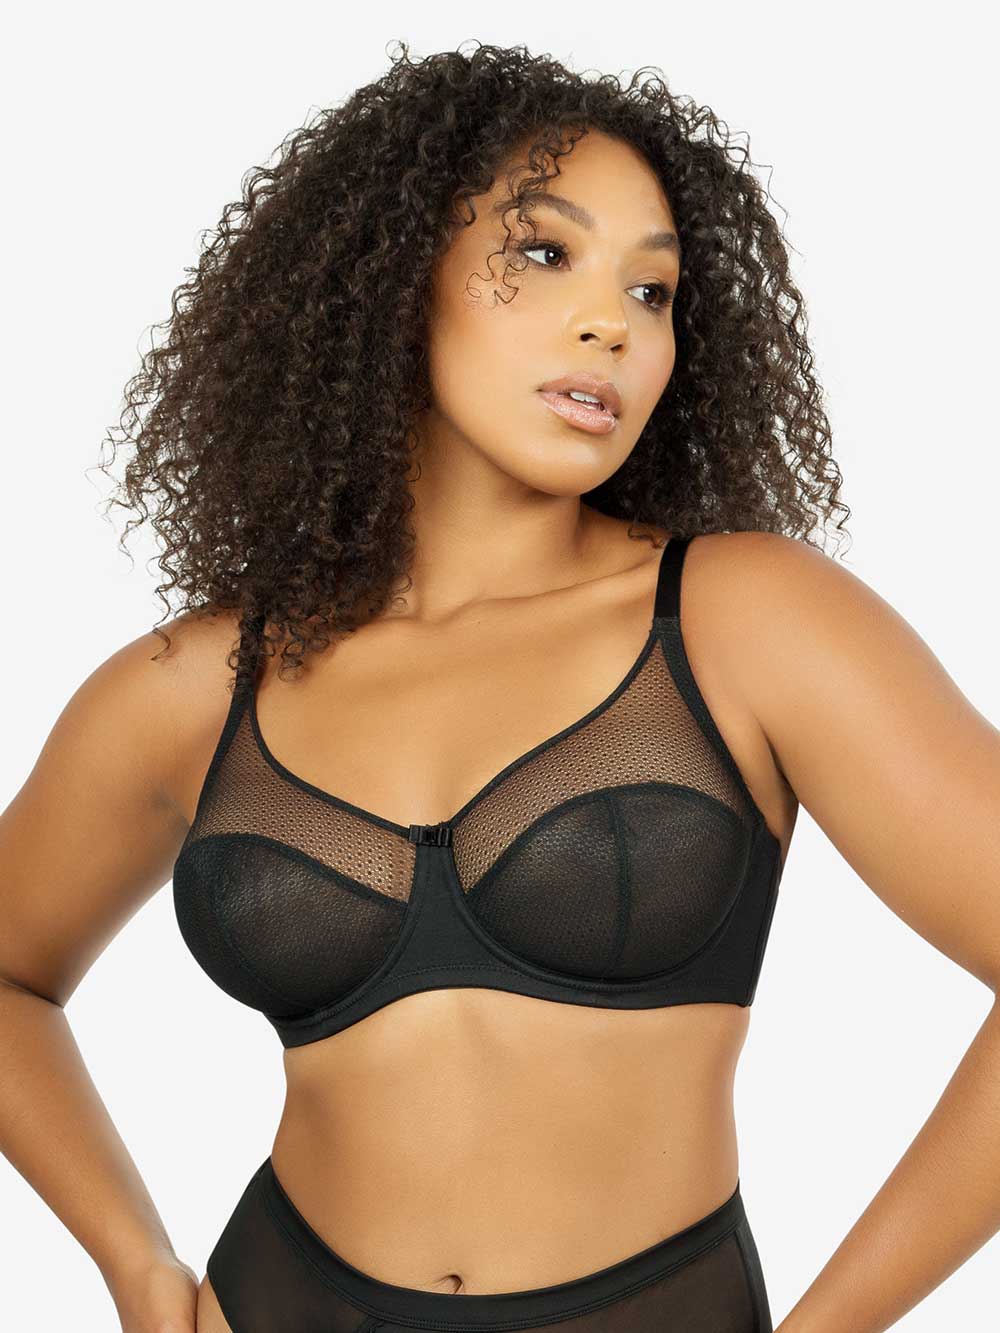 Plus Size Bras, Sexy Bras for Plus Size, Bigger & Full Figure Bras Tagged  G - HauteFlair